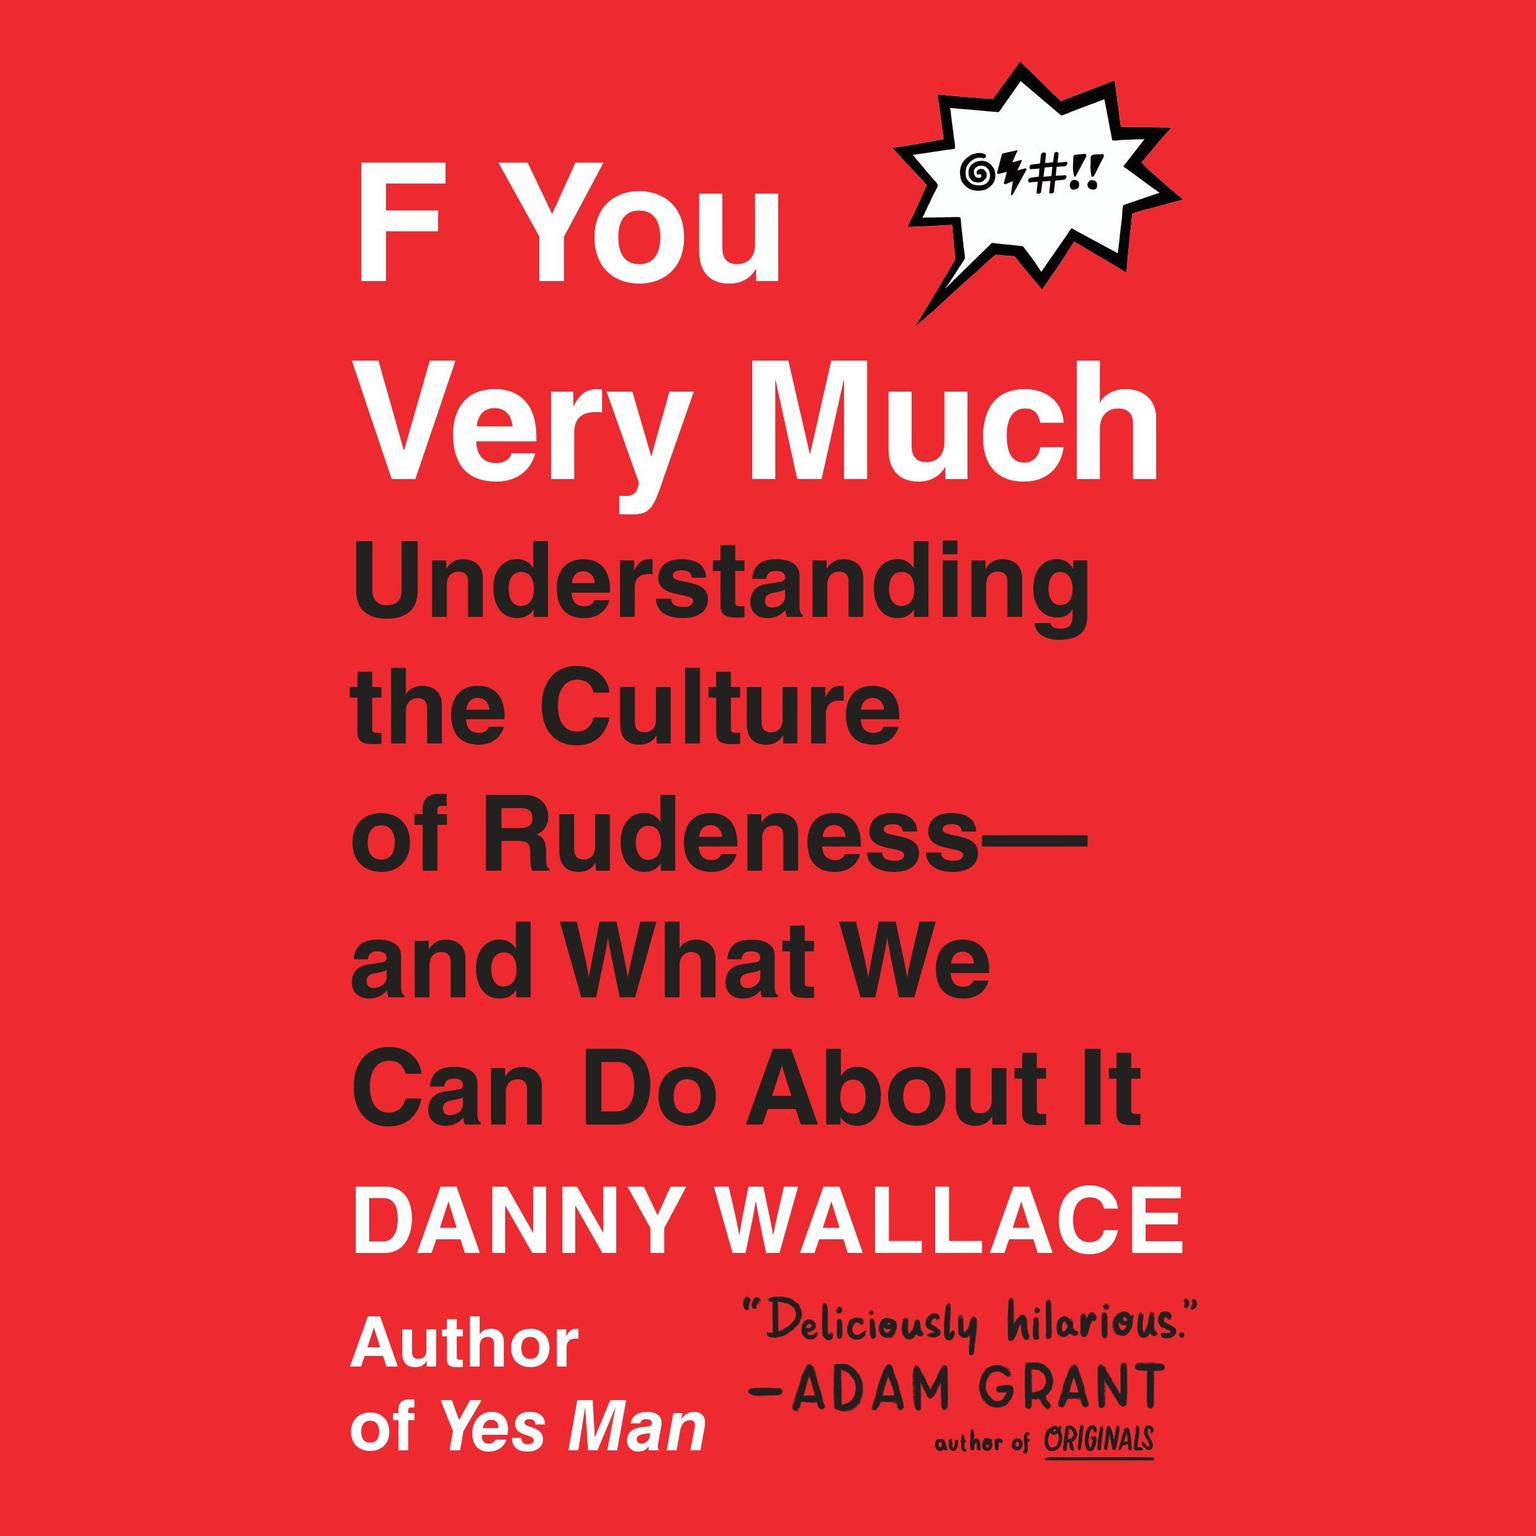 F You Very Much: Understanding the Culture of Rudeness--and What We Can Do About It Audiobook, by Danny Wallace